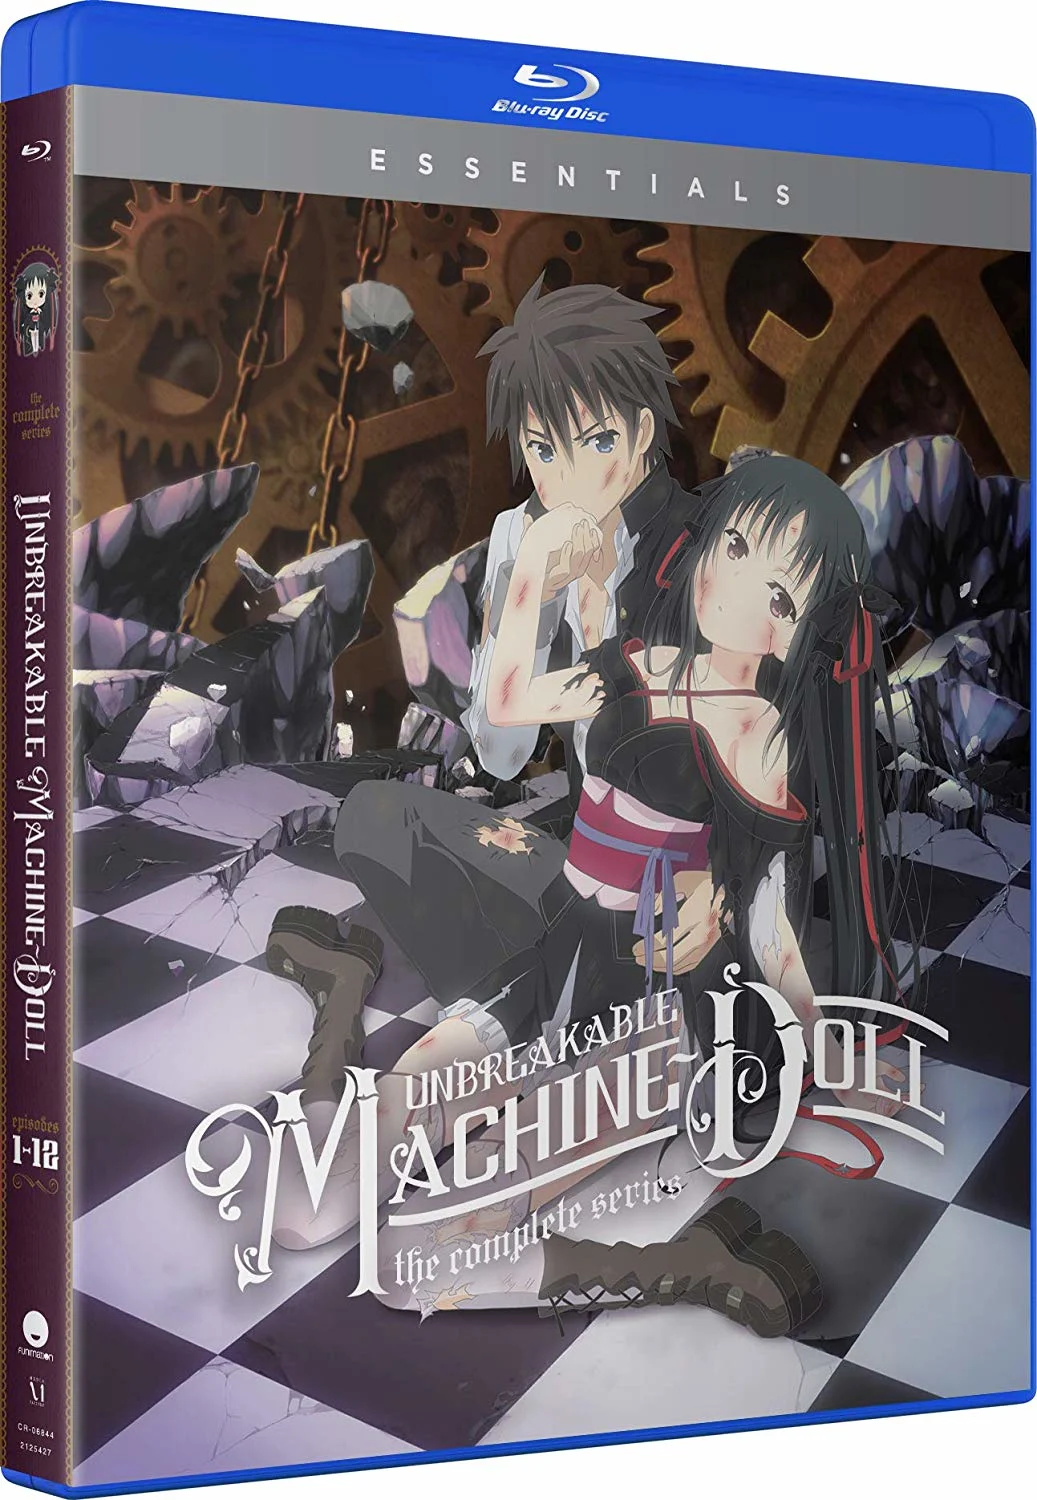 Unbreakable Machine-Doll: The Complete Series (Essentials) (Blu-ray) on MovieShack